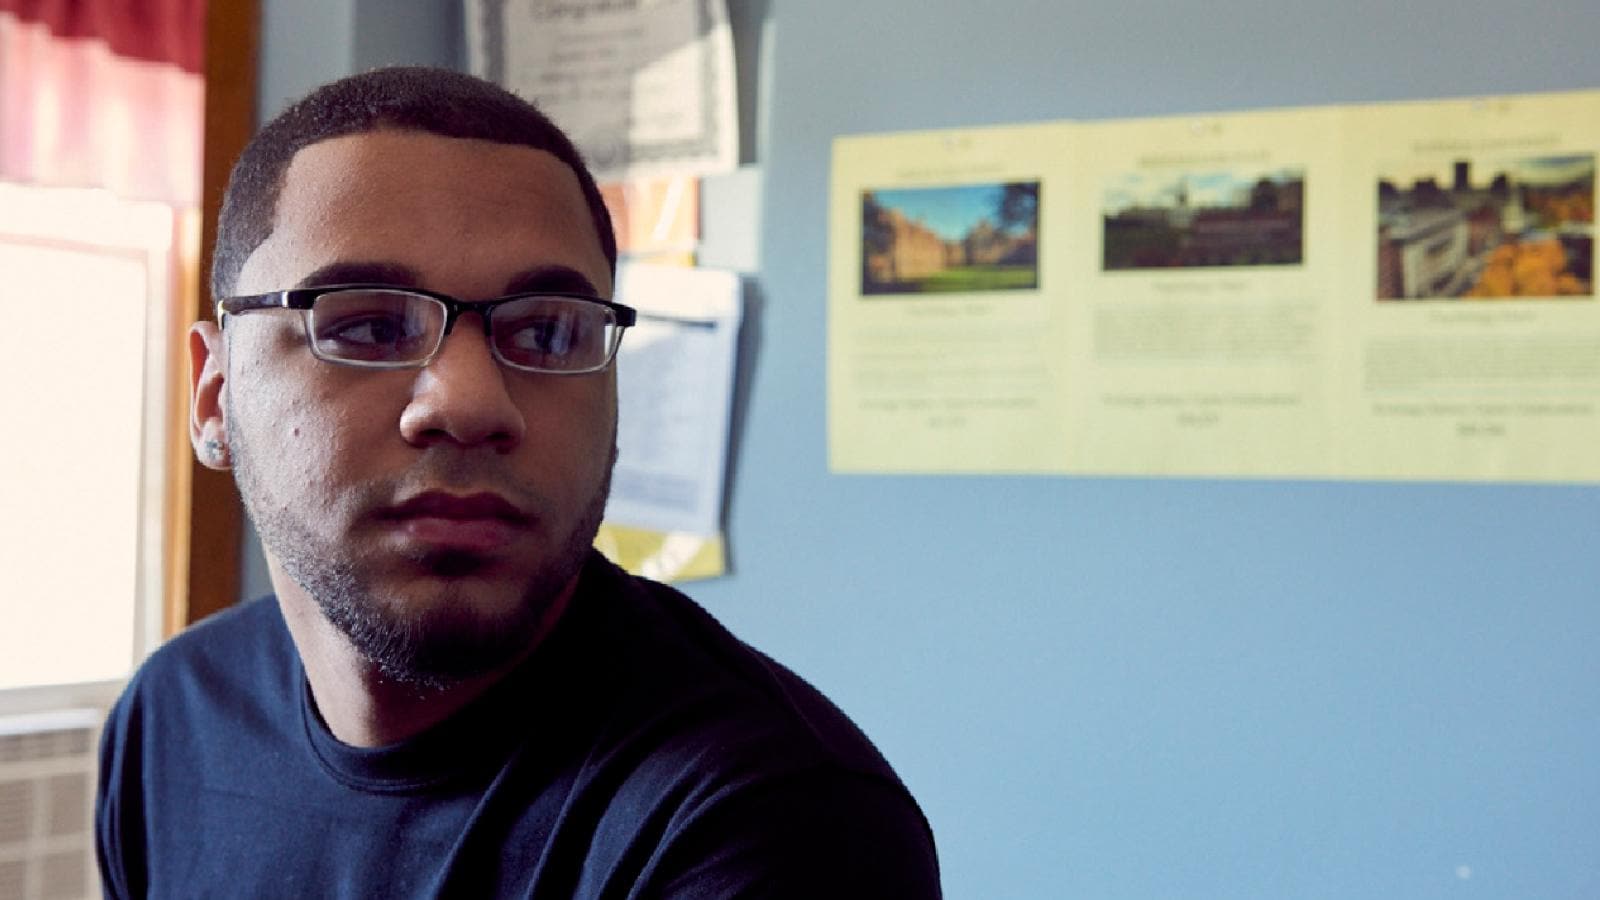 Young man with glasses from Bridge Over Troubled Waters nonprofit 